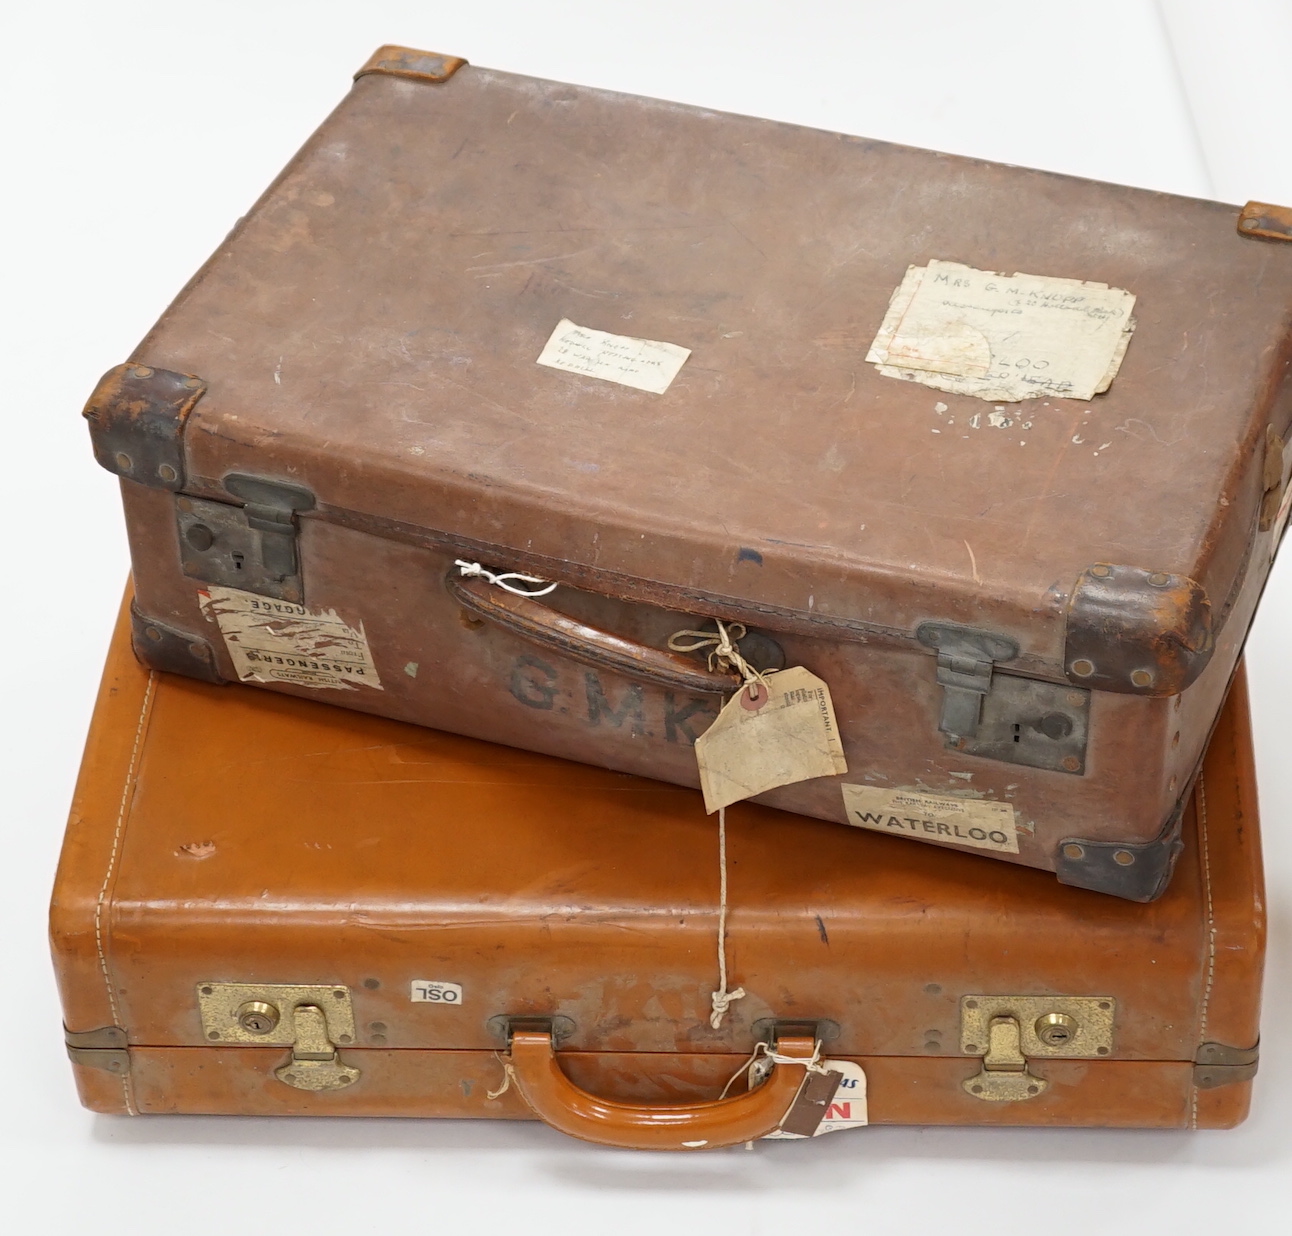 Two vintage suitcases with various labels including British Railways Waterloo, the largest 61cm wide